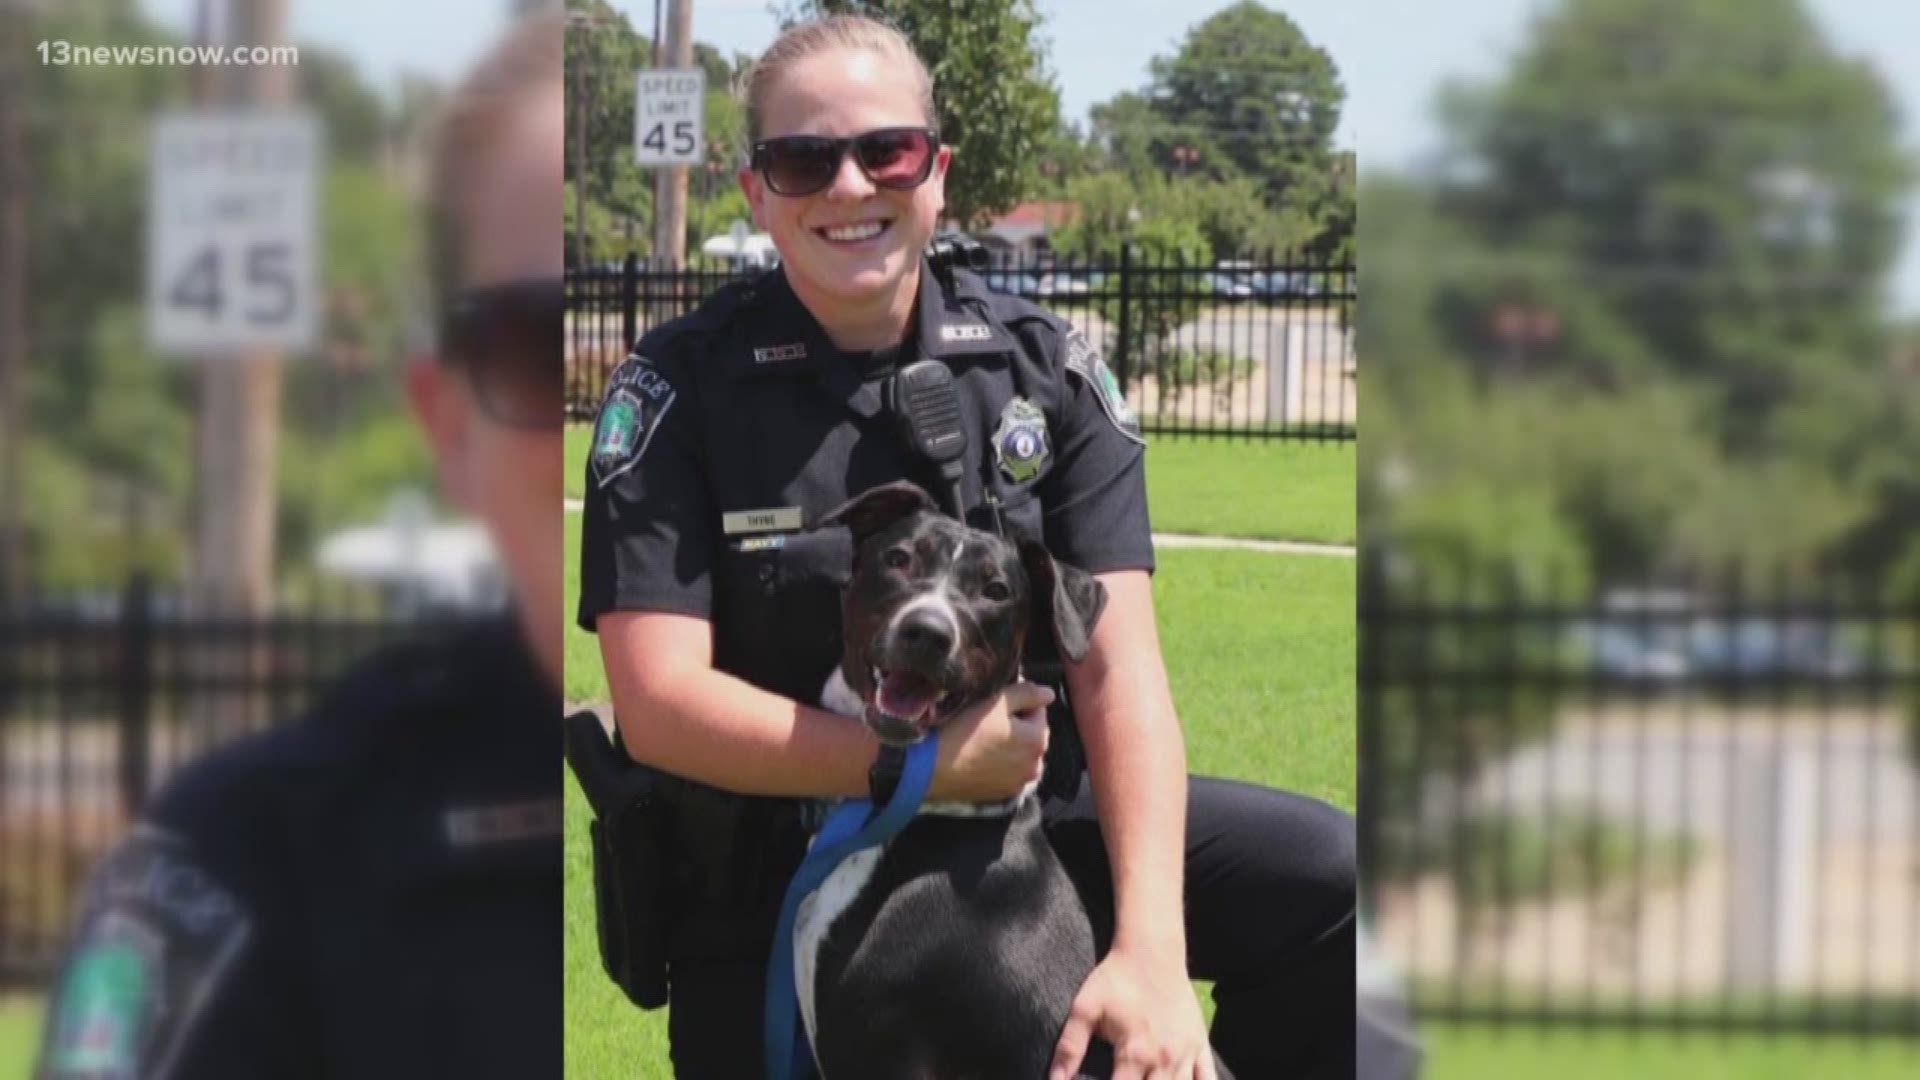 Newport News Officer Katie Thyne died in the line of duty on January 23, 2020. She had a huge impact on her colleagues as well as the community.